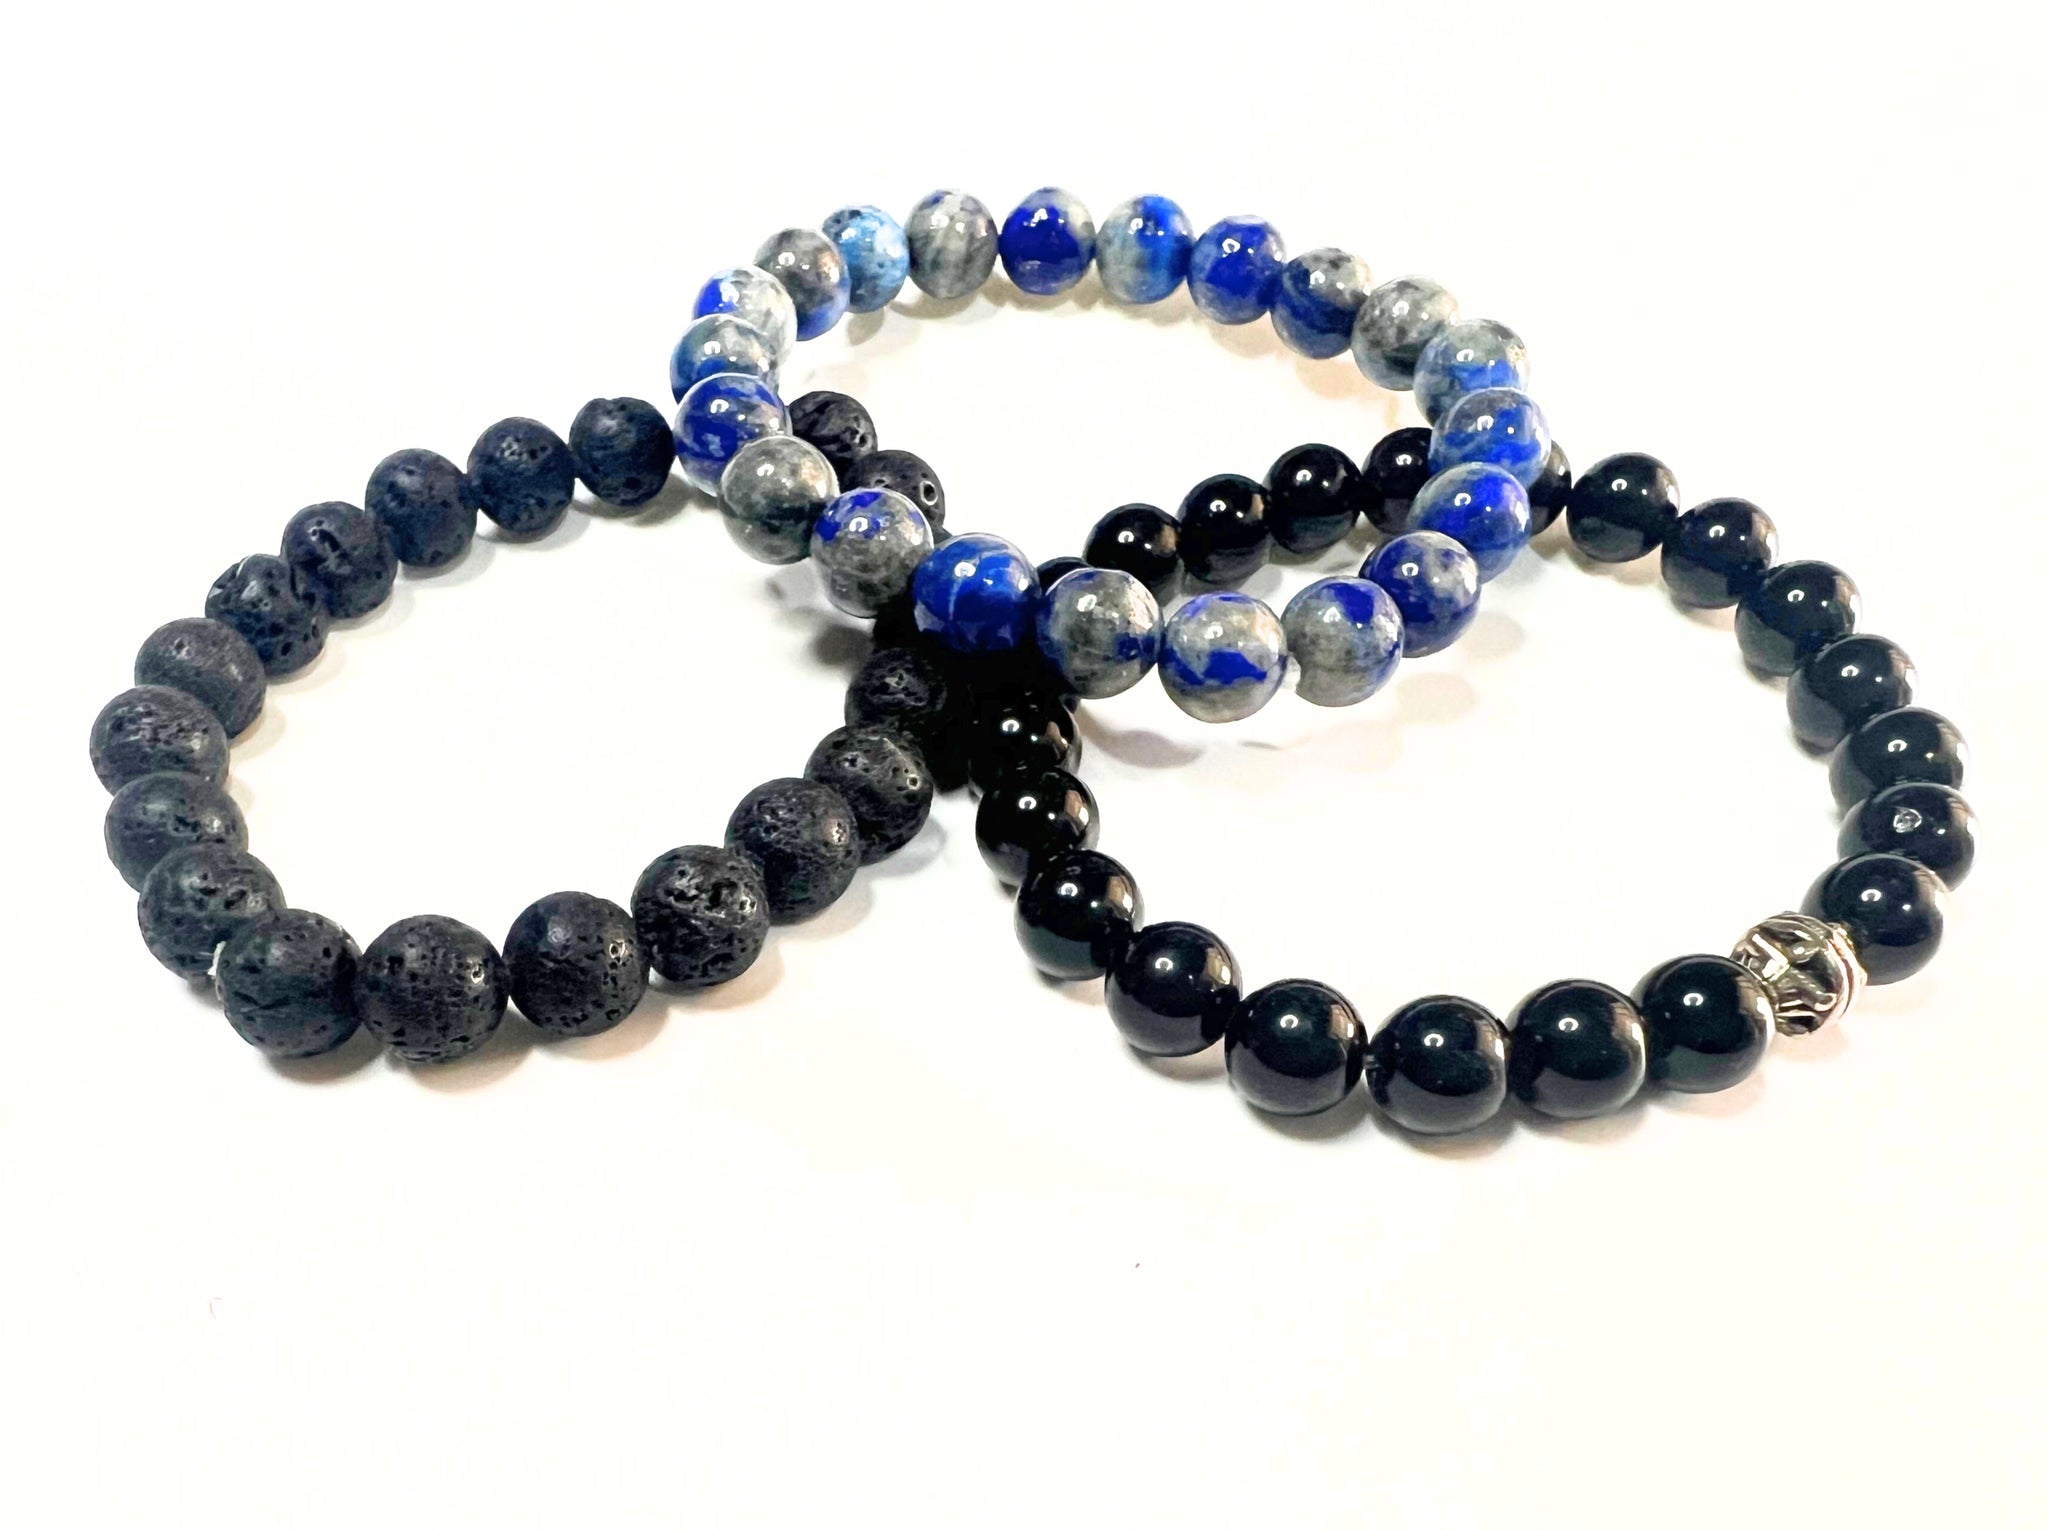 CERTIFIED LAVA STONE BRACELET - BLACK COLOUR MEDITATION HEALING ACCESSORY HOME OFFICE GIFT JEWELLERY